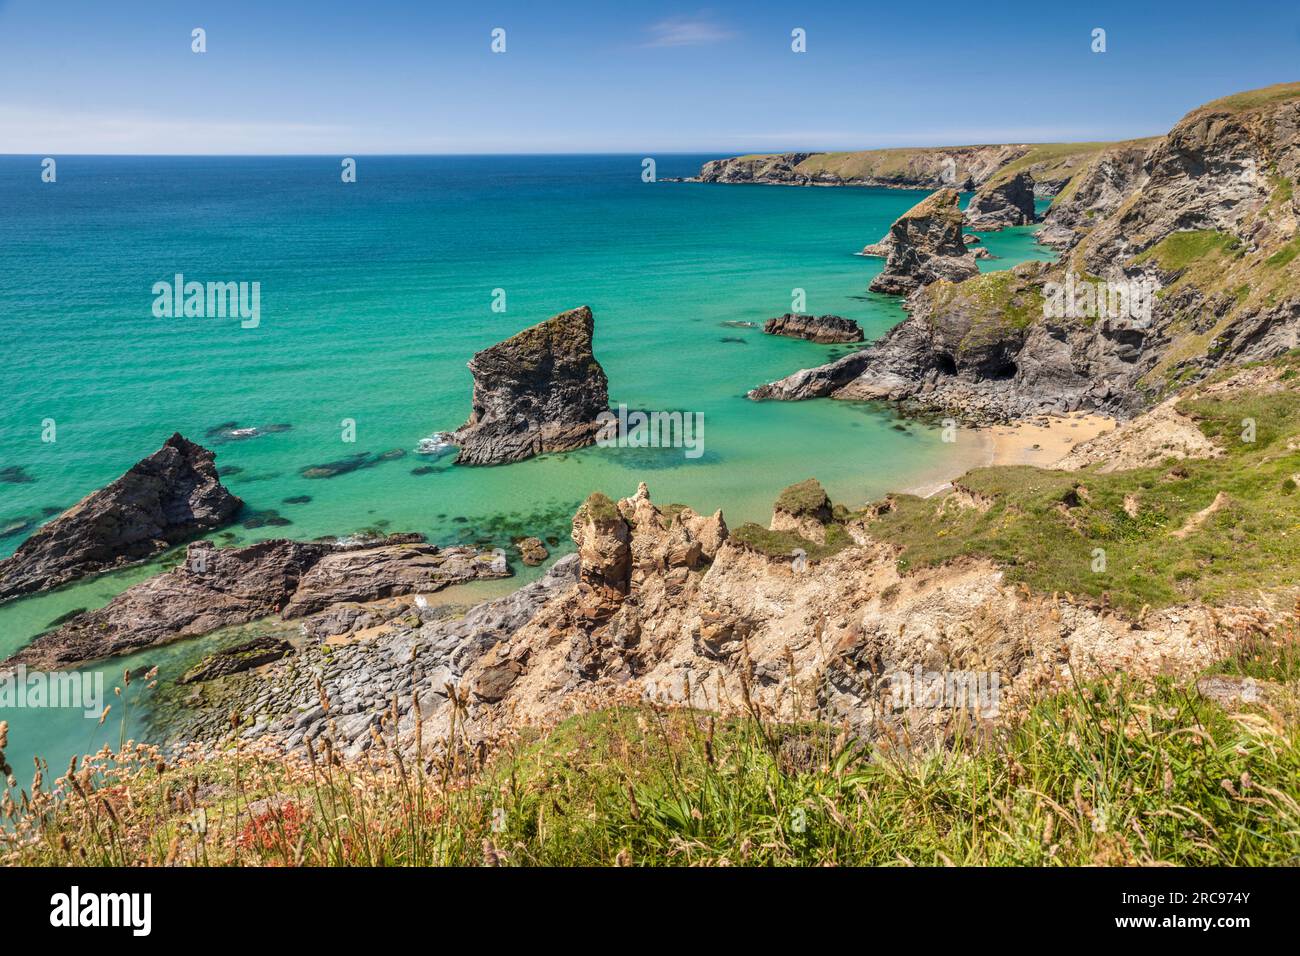 Geografie/Reisen, Großbritannien, Cornwall, Padstow, Coast Bedruthan Stepptanz in Padstow, Cornwall, ADDITIONAL-RIGHTS-CLEARANCE-INFO-NOT-AVAILABLE Stockfoto